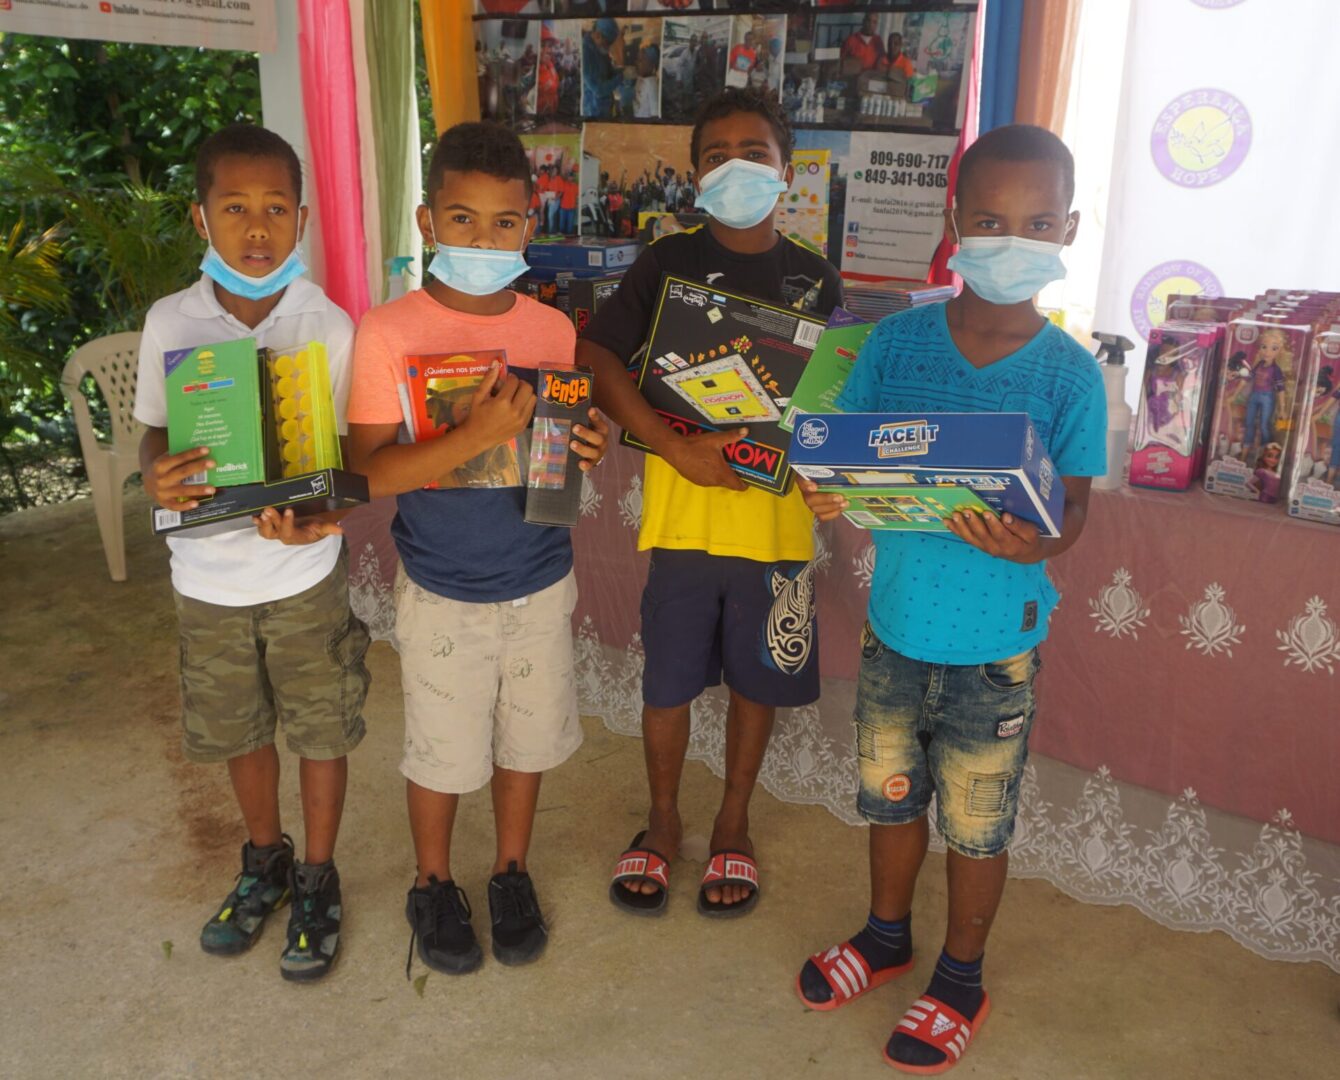 Four boys with masks holding toys in front of a table with books and toys, batch 5